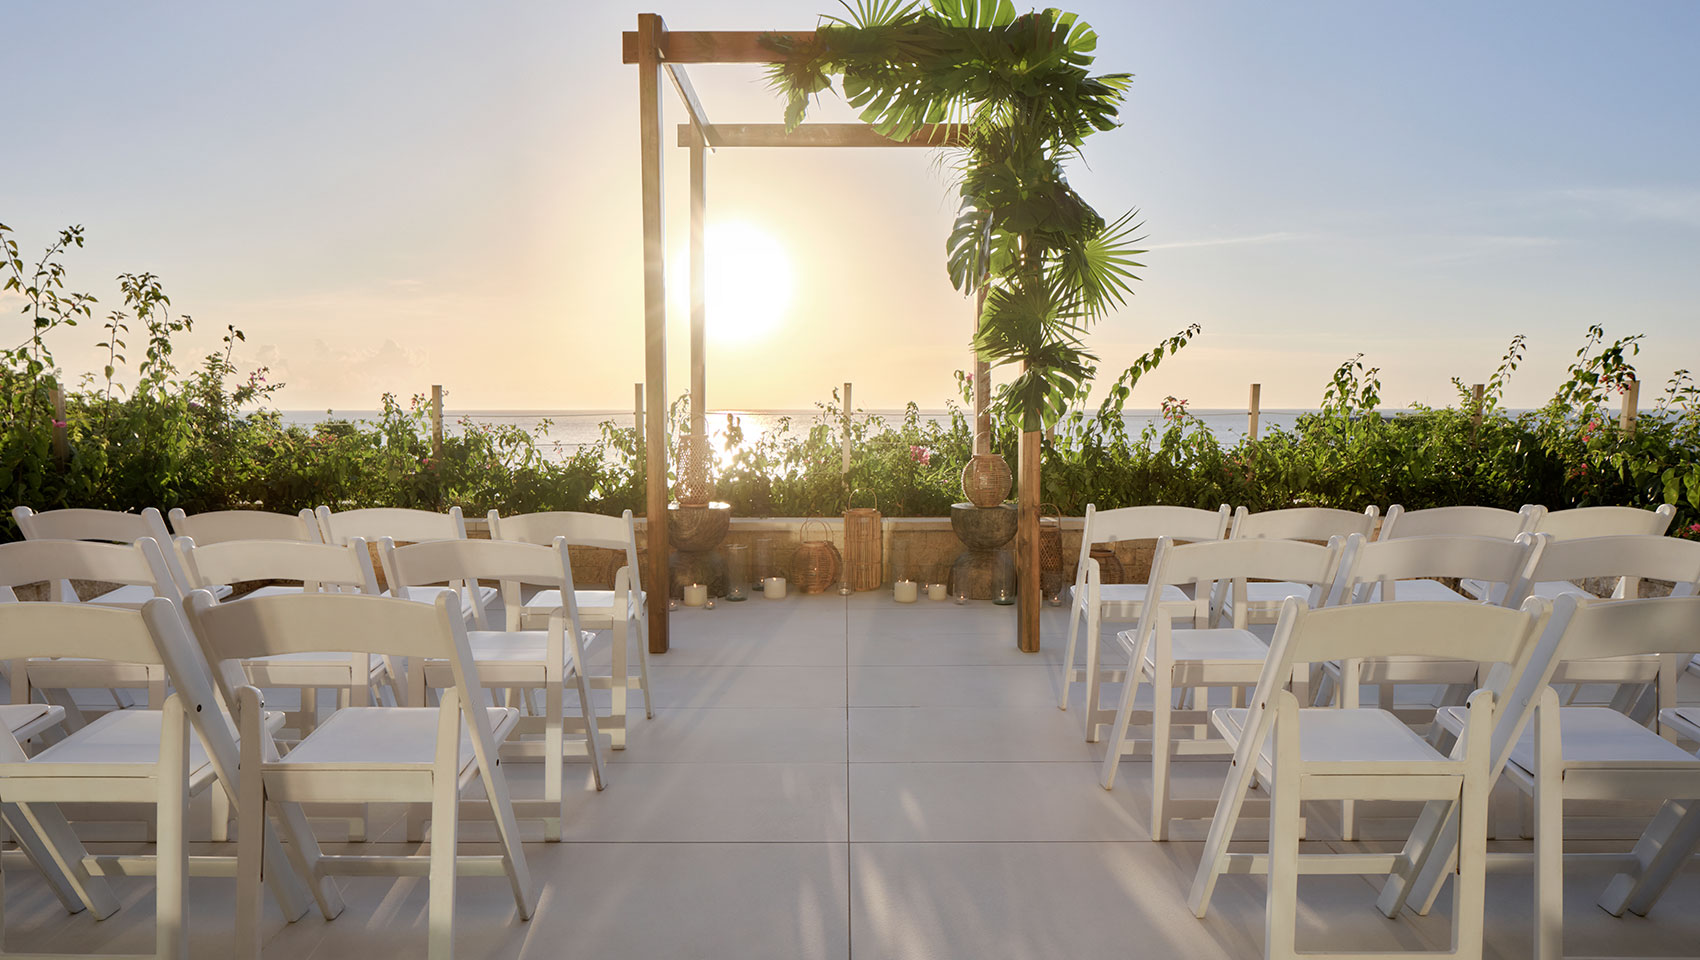 Wedding patio with full view overlooking ocean at sunset